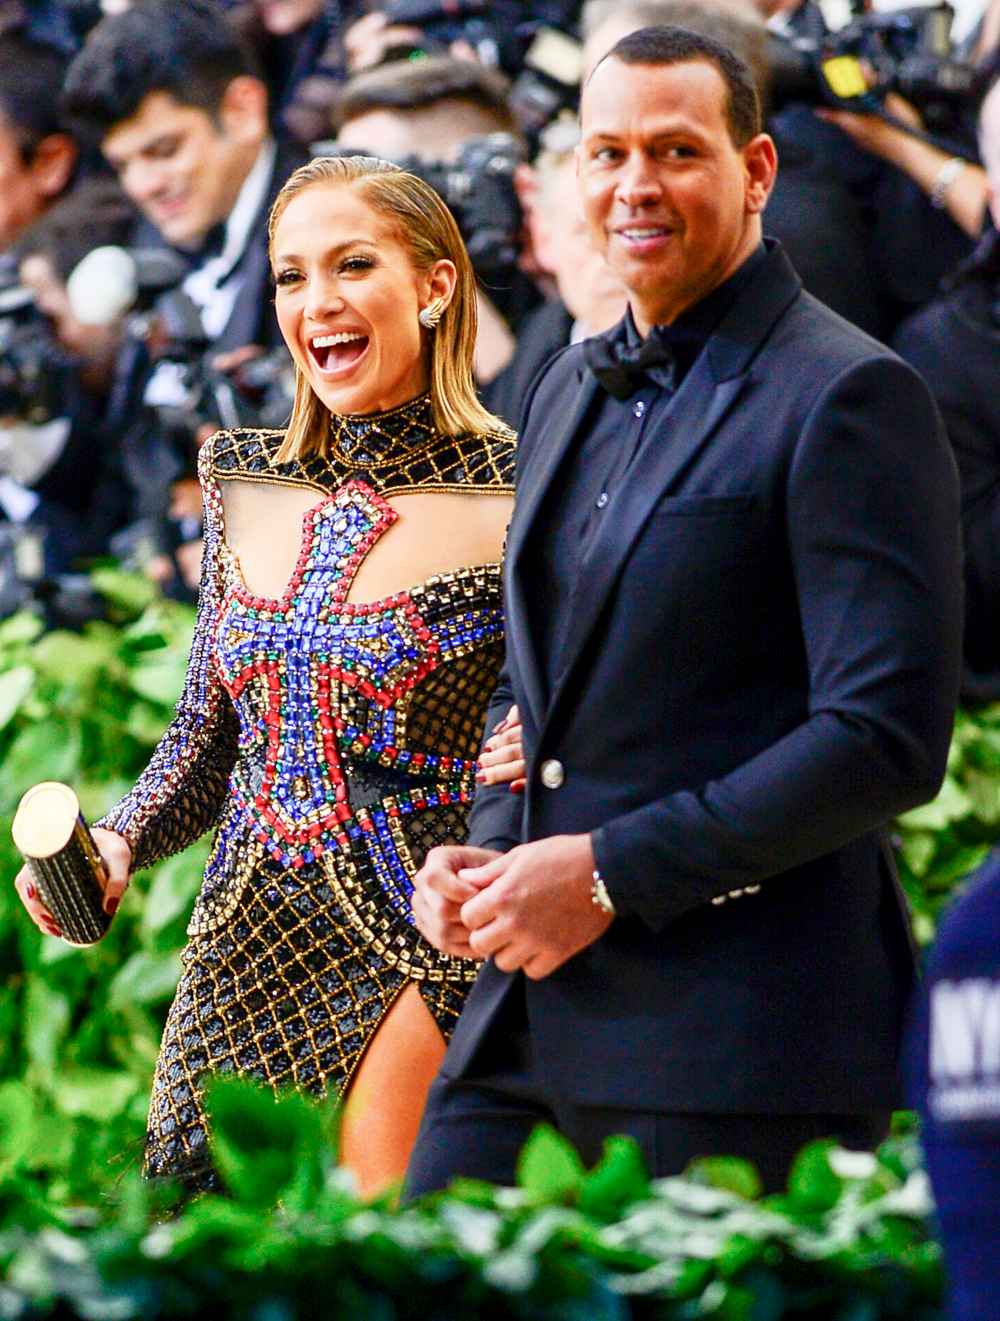 Jennifer Lopez and Alex Rodriguez attend the Heavenly Bodies: Fashion & The Catholic Imagination Costume Institute Gala at The Metropolitan Museum of Art on May 7, 2018 in New York City.